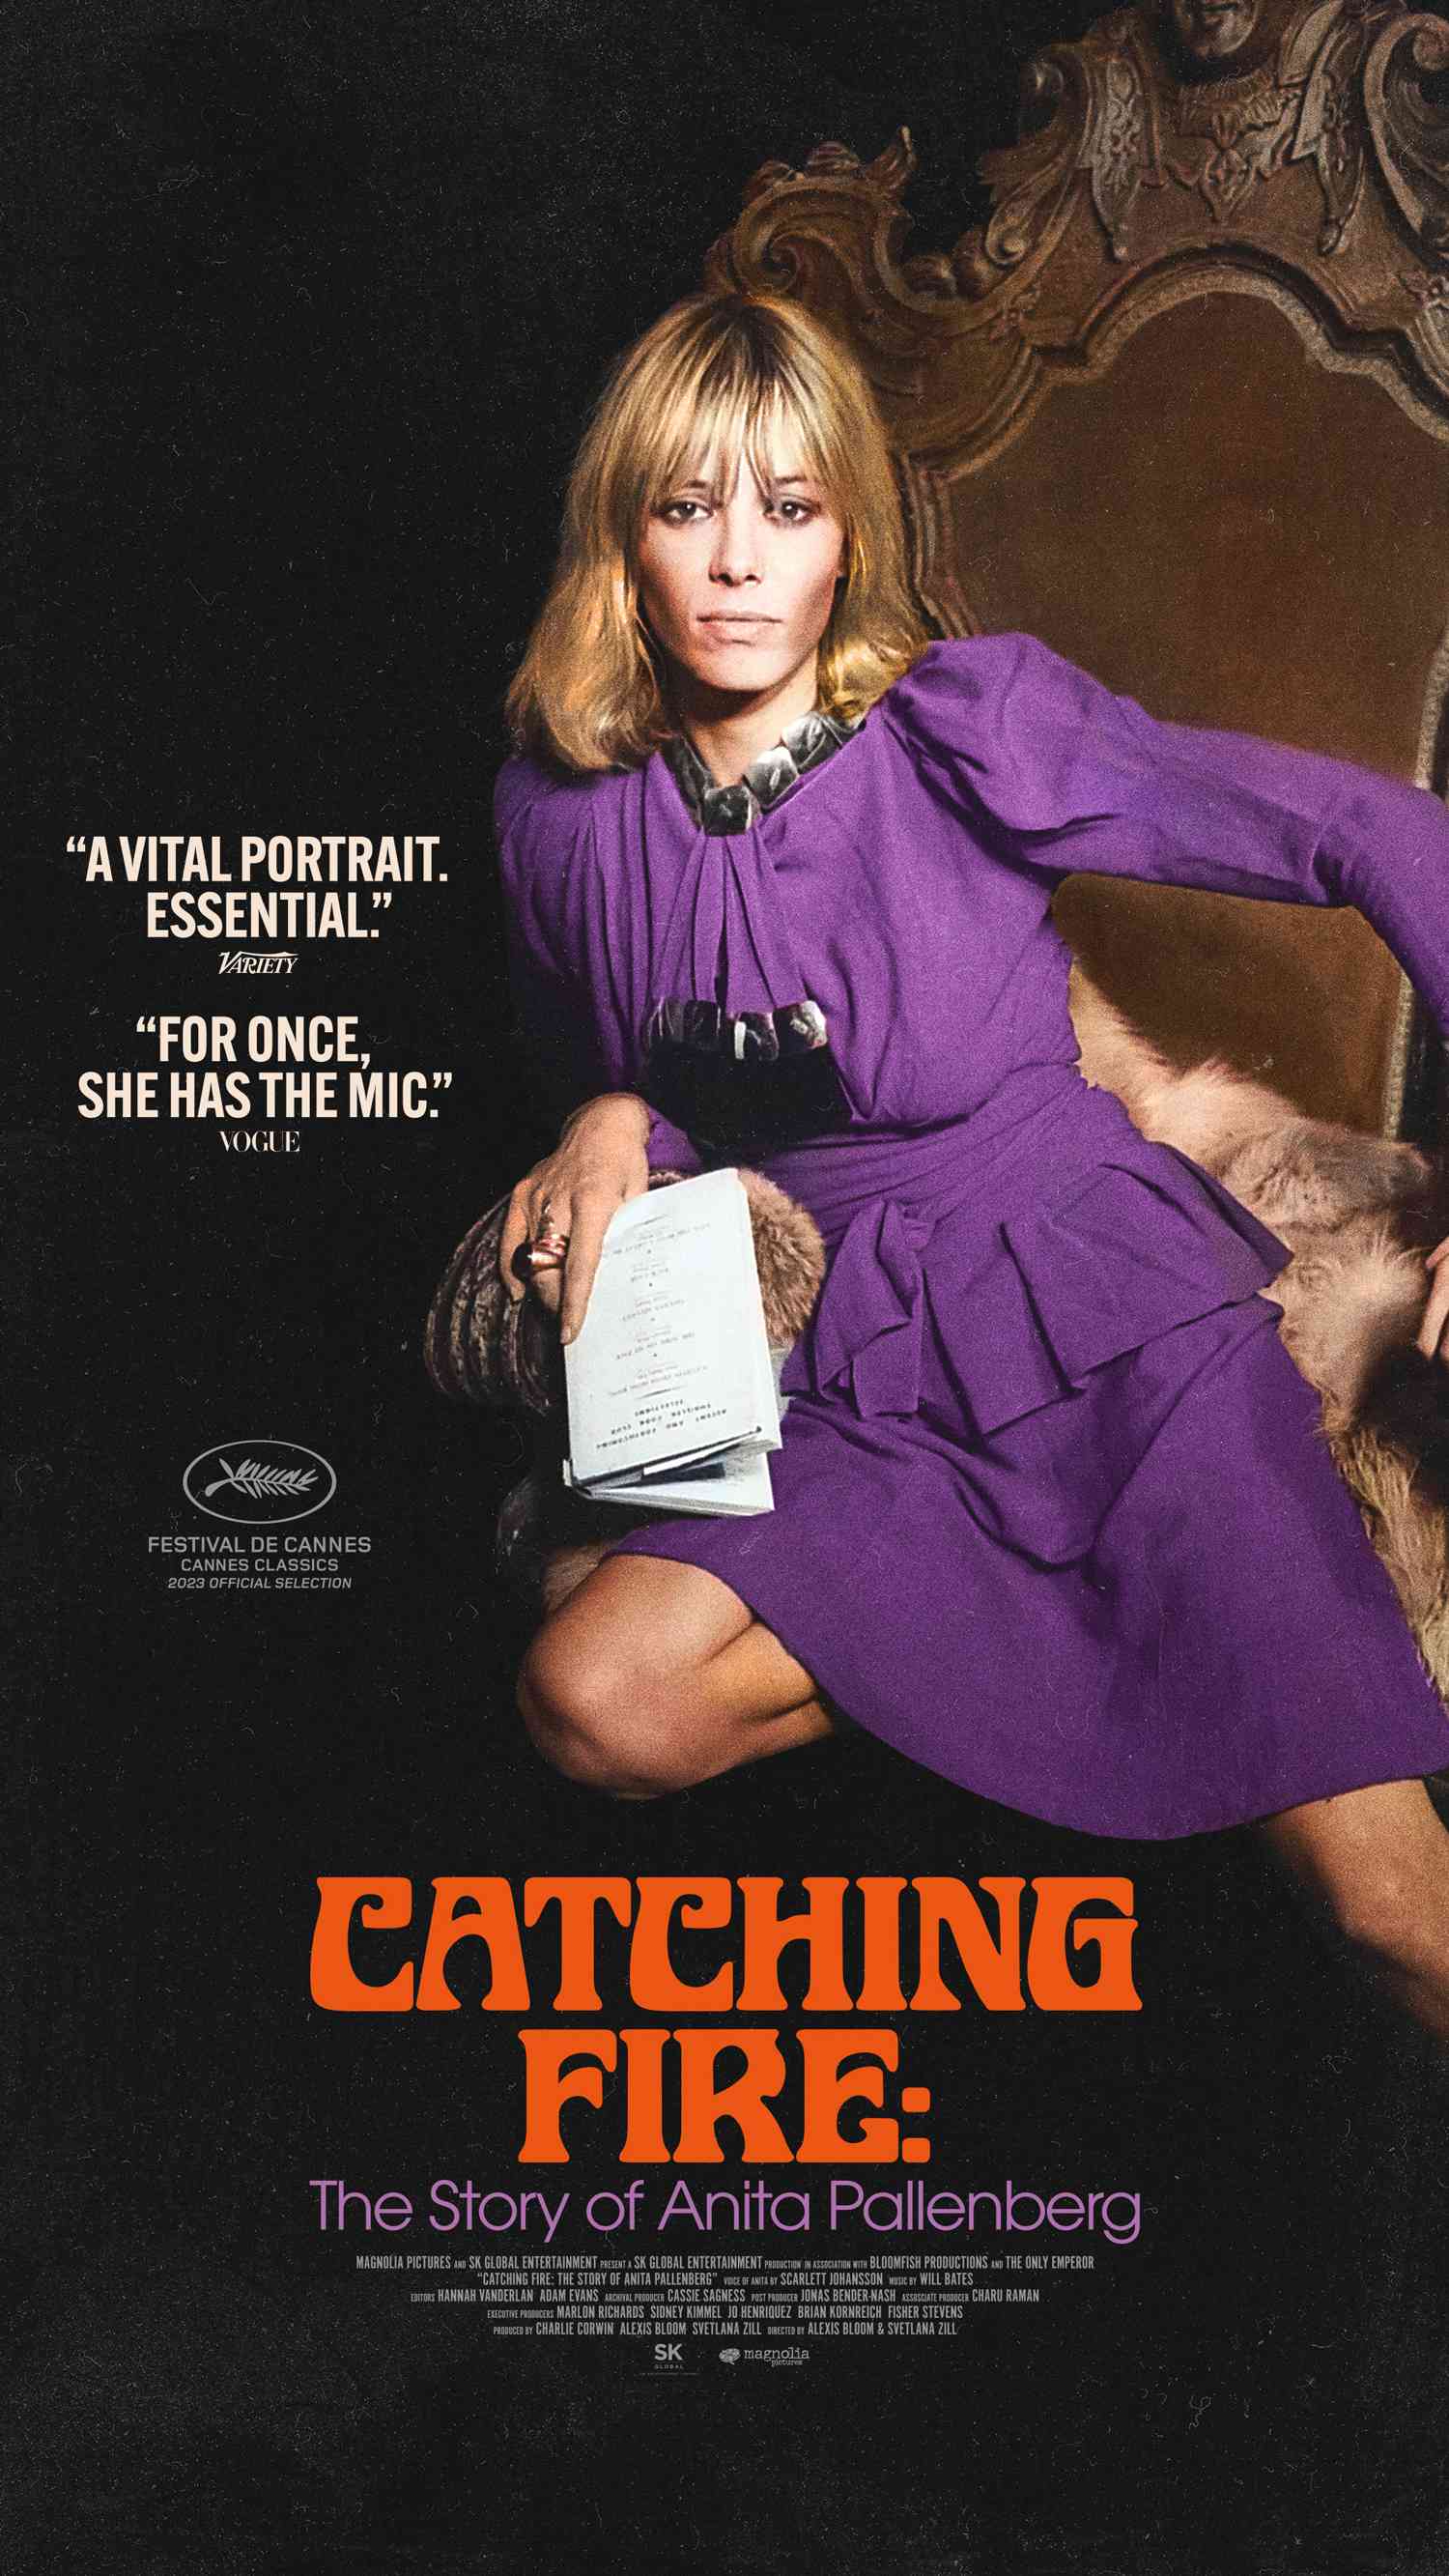 Catching Fire: The Story of Anita Pallenberg, film poster